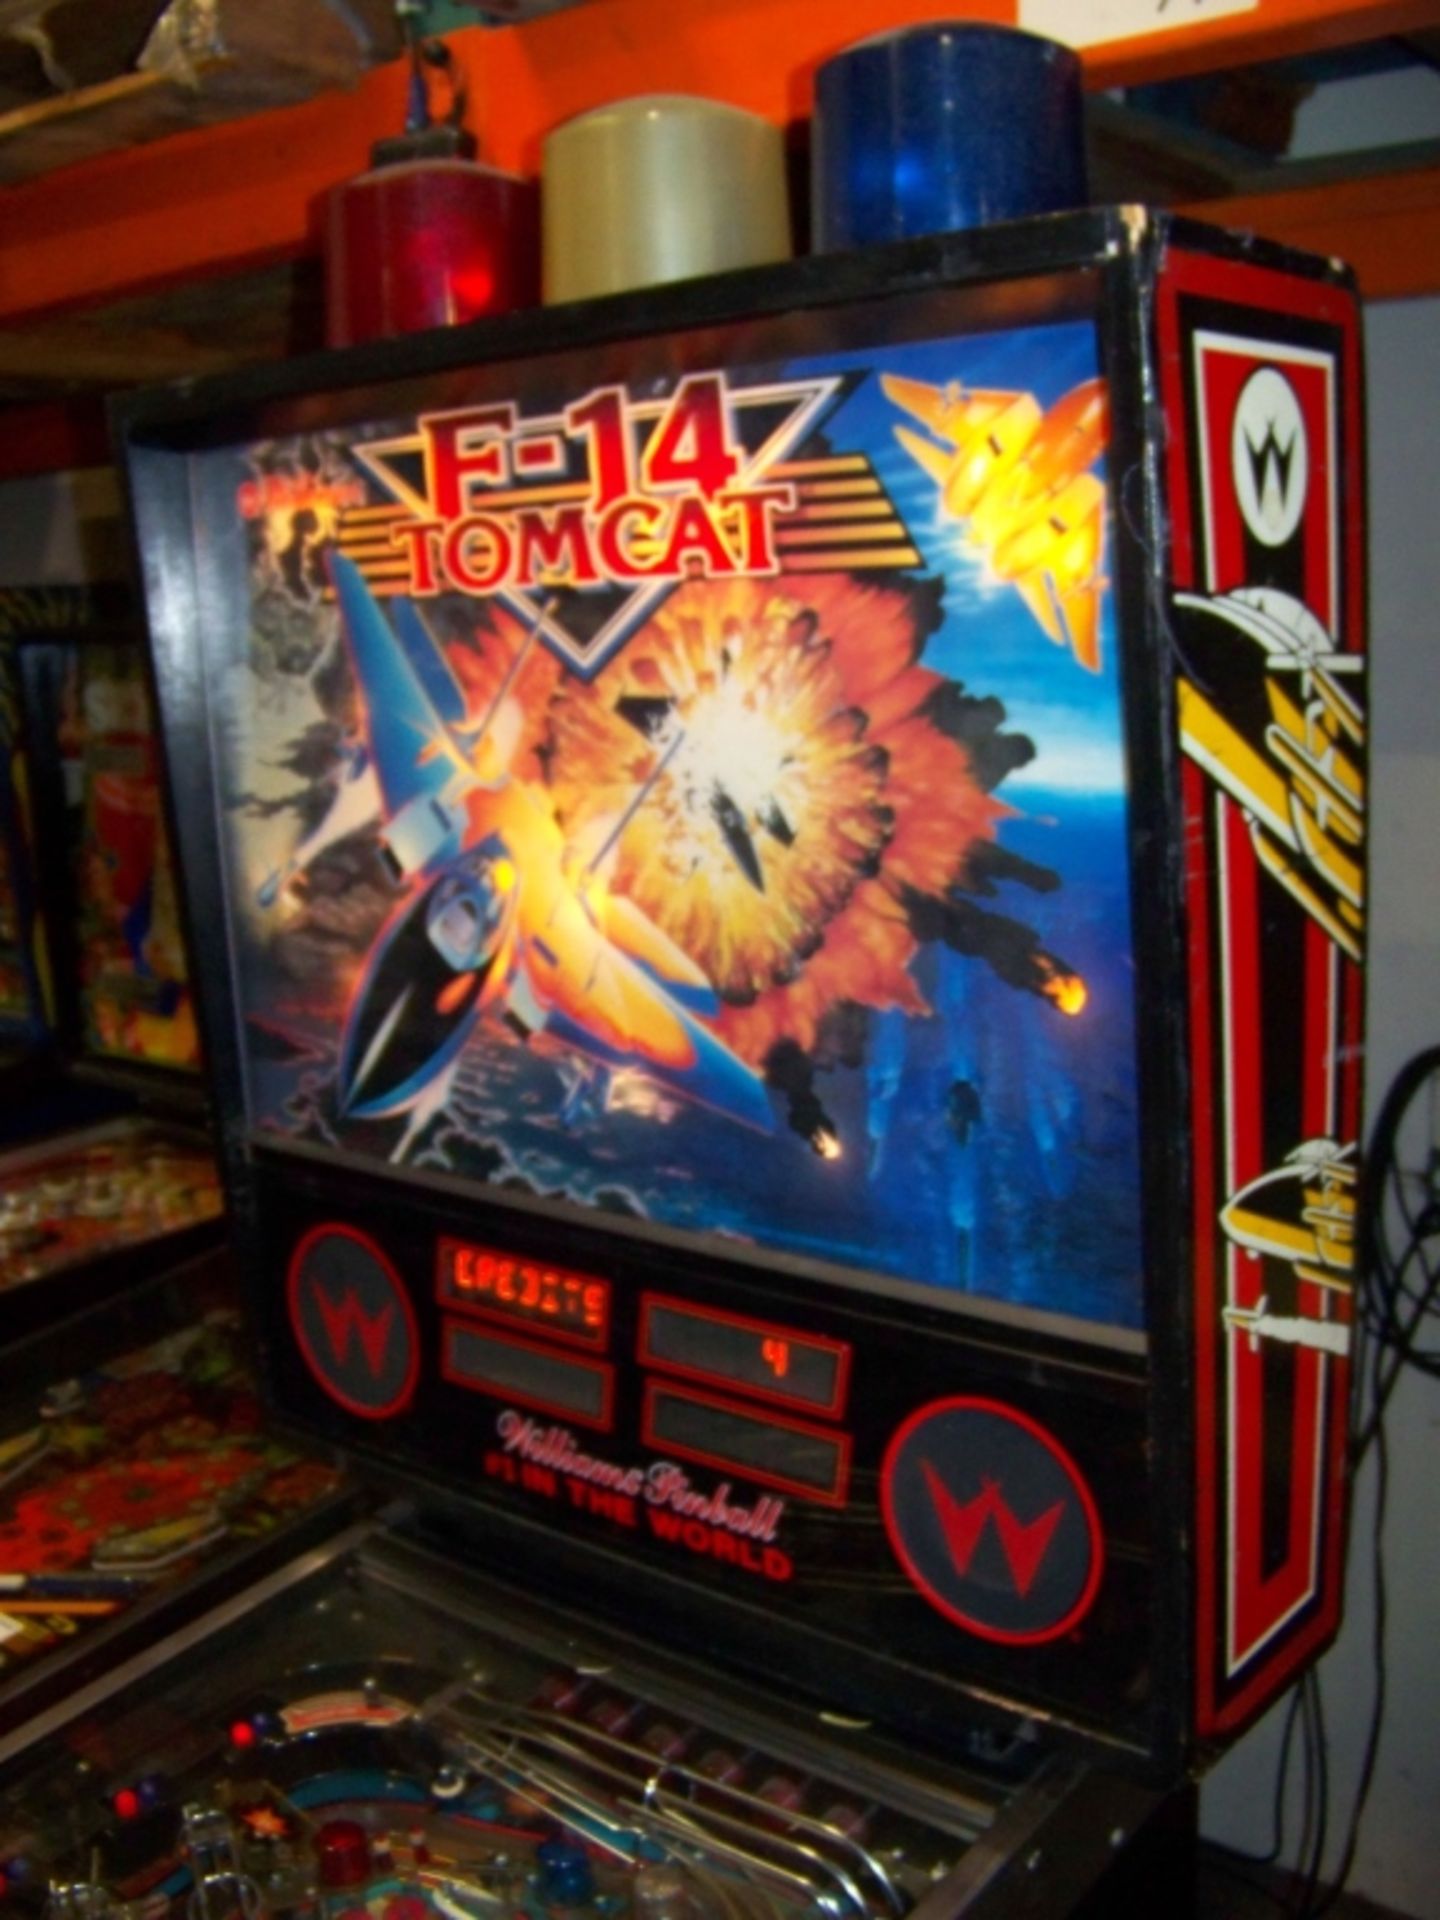 F-14 TOMCAT PINBALL MACHINE WILLIAMS 1987 Item is in used condition. Evidence of wear and commercial - Image 9 of 9